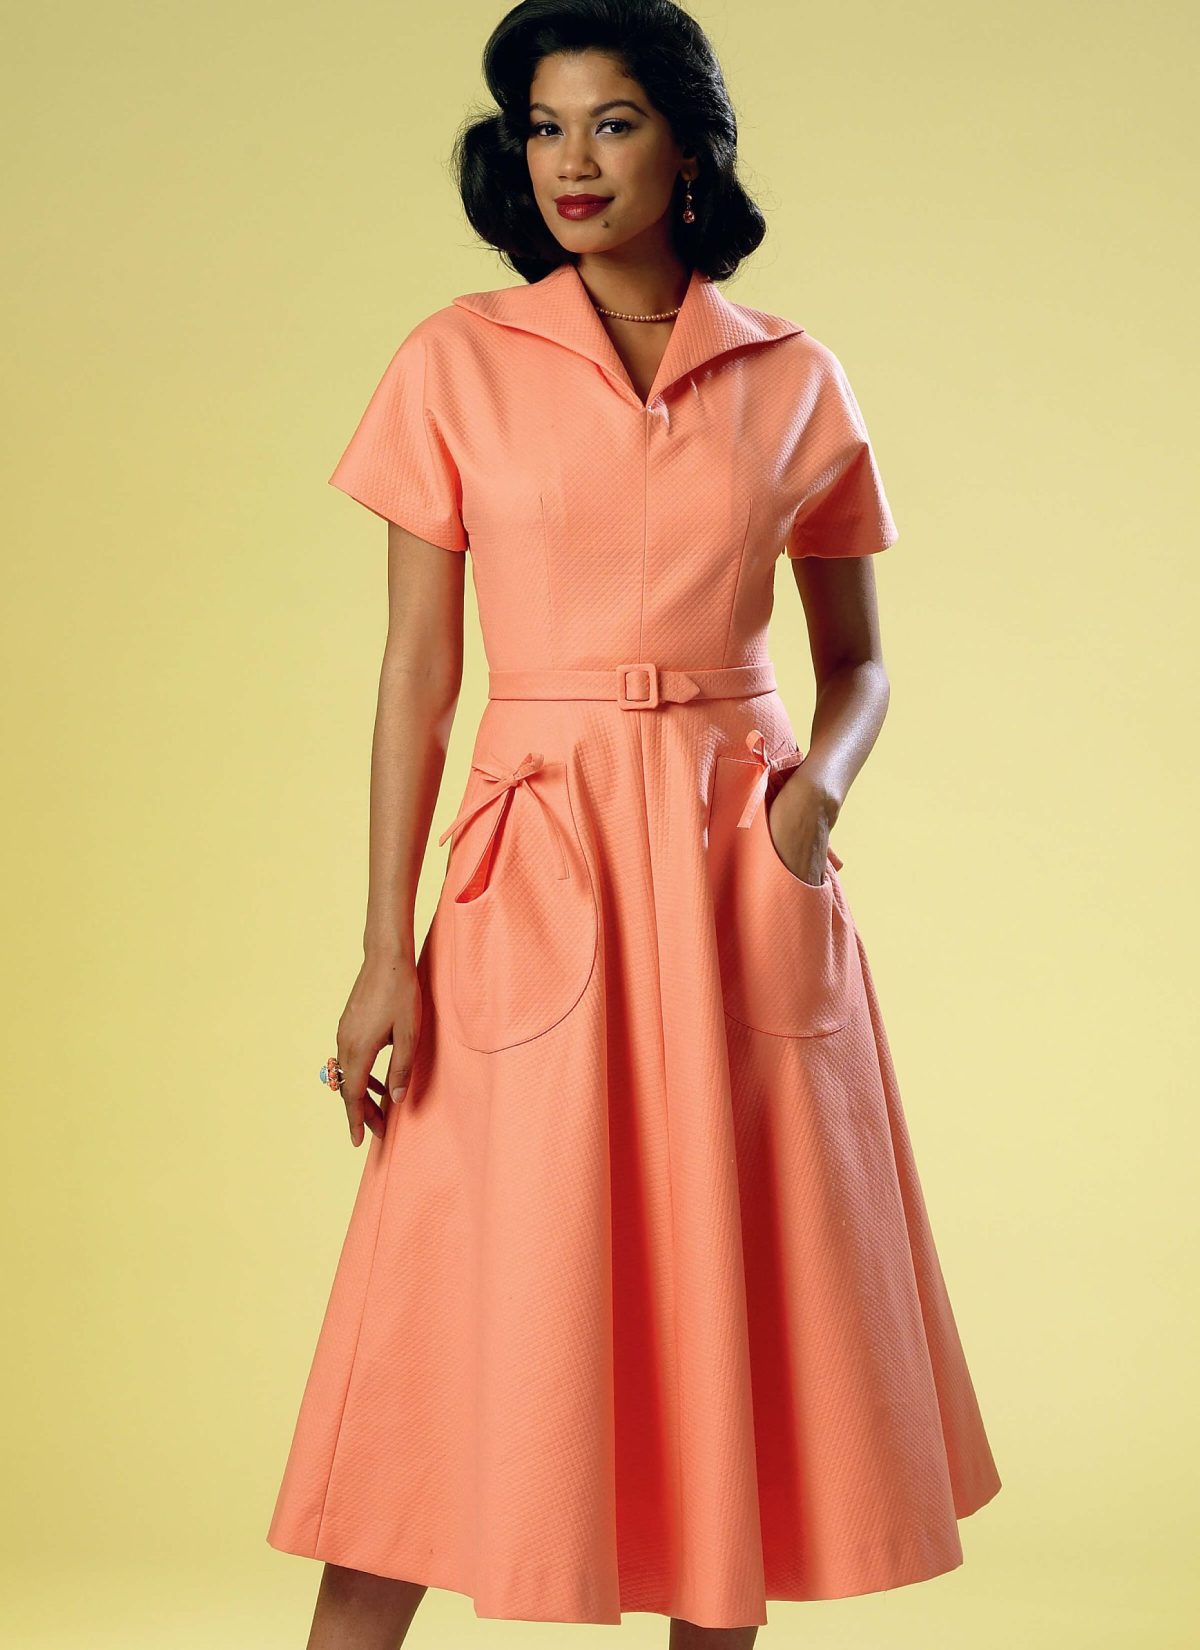 Butterick Sewing Pattern B6055 Misses' Dress and Belt